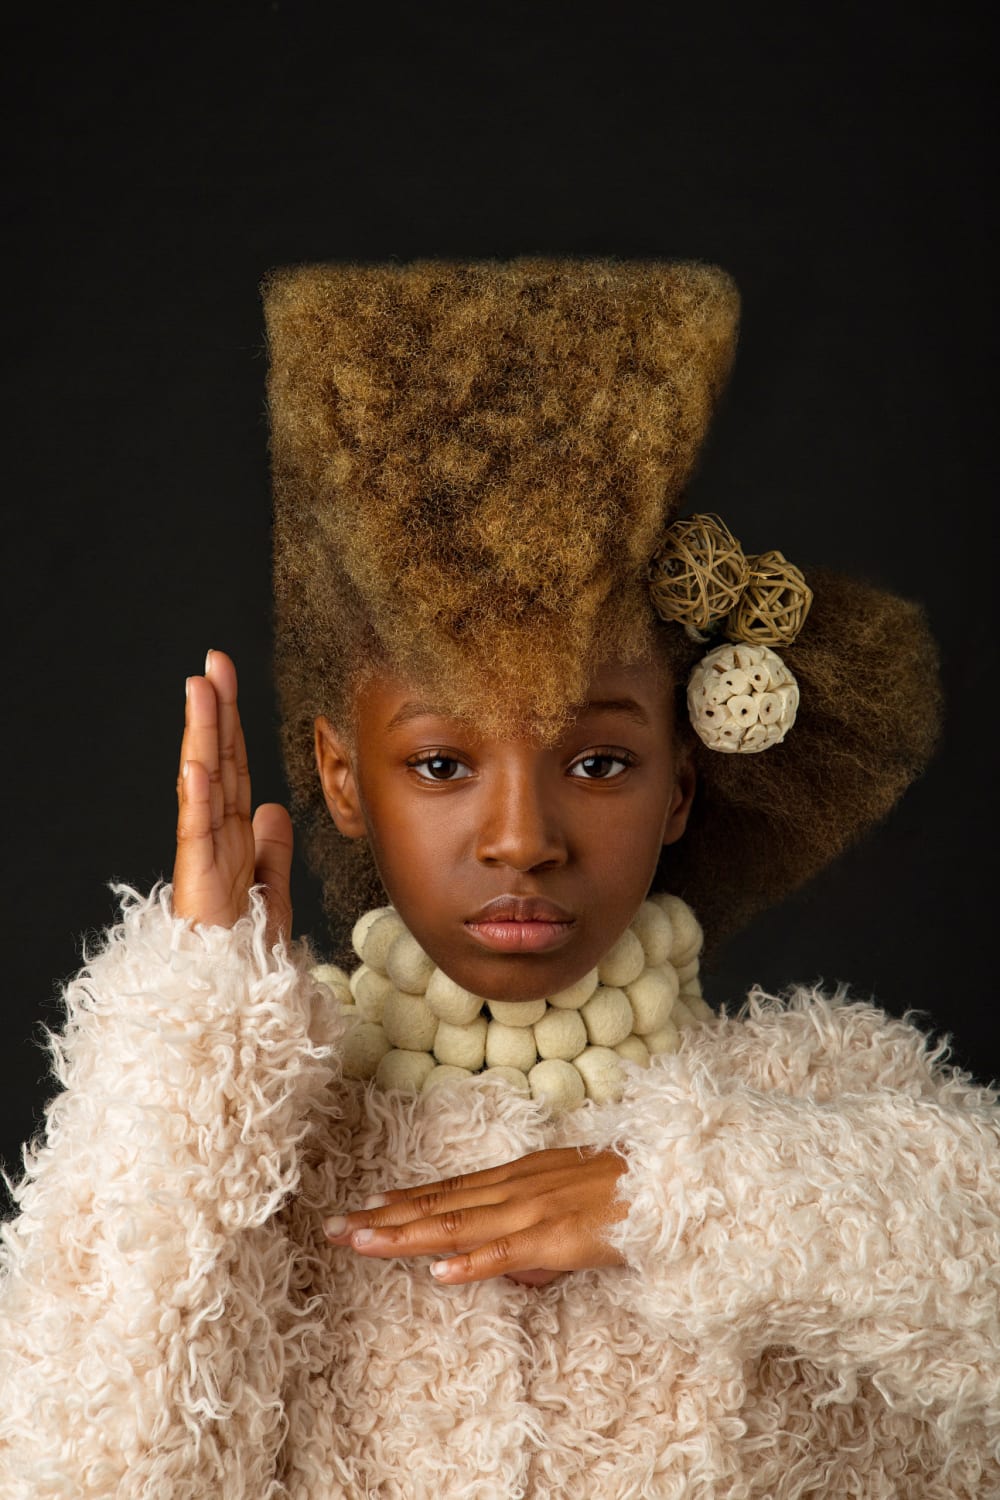 AfroArt Photo Series Challenges Beauty Standards with Young Black Models — Colossal